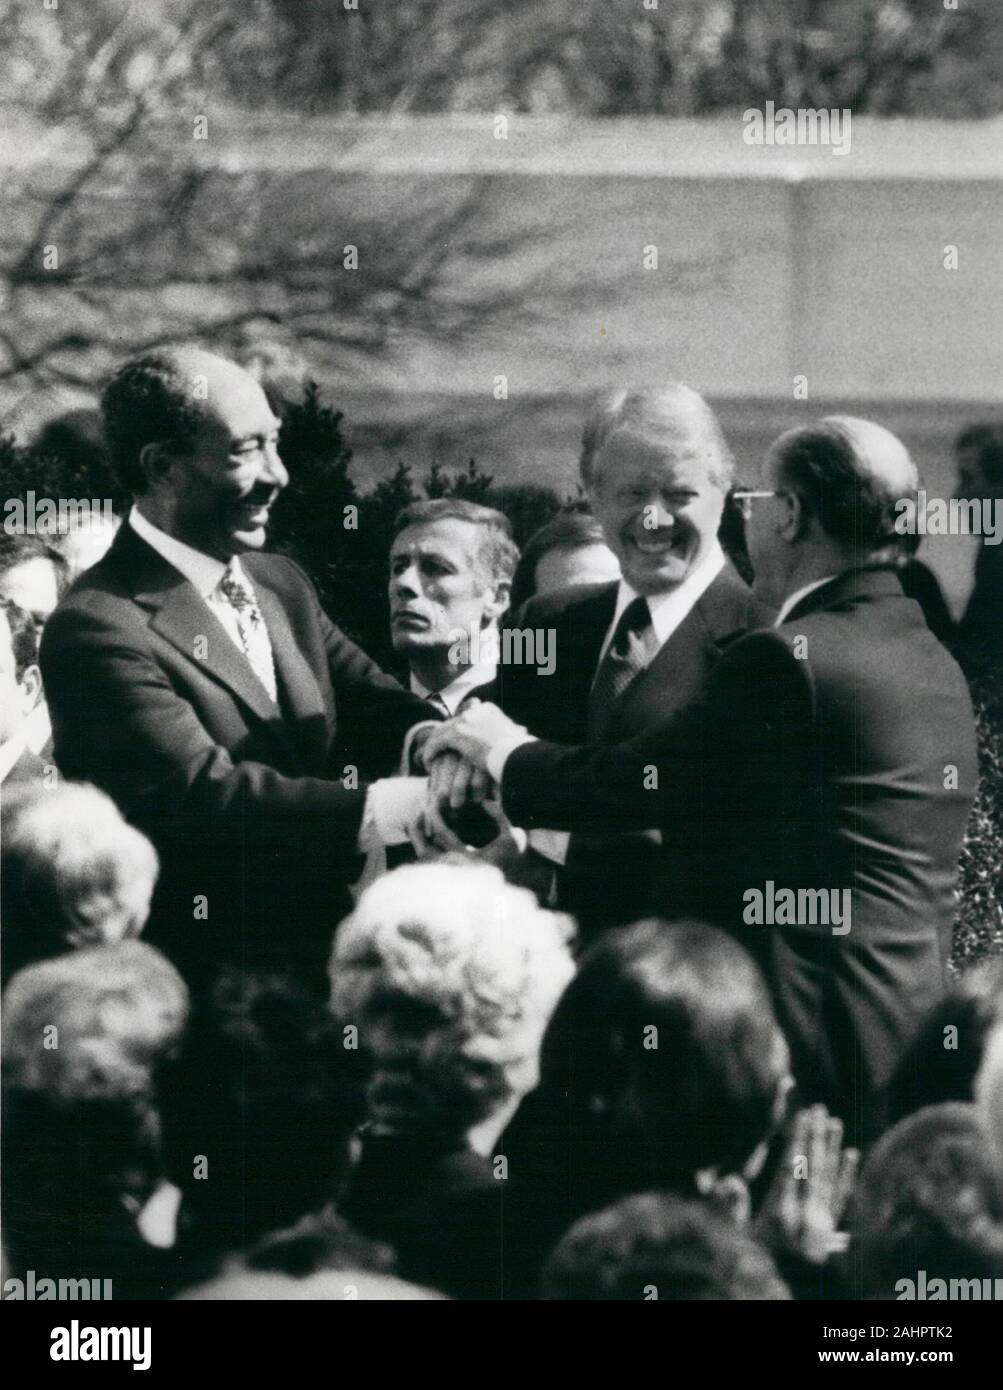 Mar 26, 1979 - Washington, District of Columbia, USA - Egyptian President ANWAR SADAT, standing left, with Israeli Prime Minister MENACHEM BEGIN, standing right, and US President JIMMY CARTER, center, pile their hands in a three way handshake after signing a peace treaty between Egypt and Israel. (Credit Image: © Keystone Press Agency/Keystone USA via ZUMAPRESS.com) Stock Photo